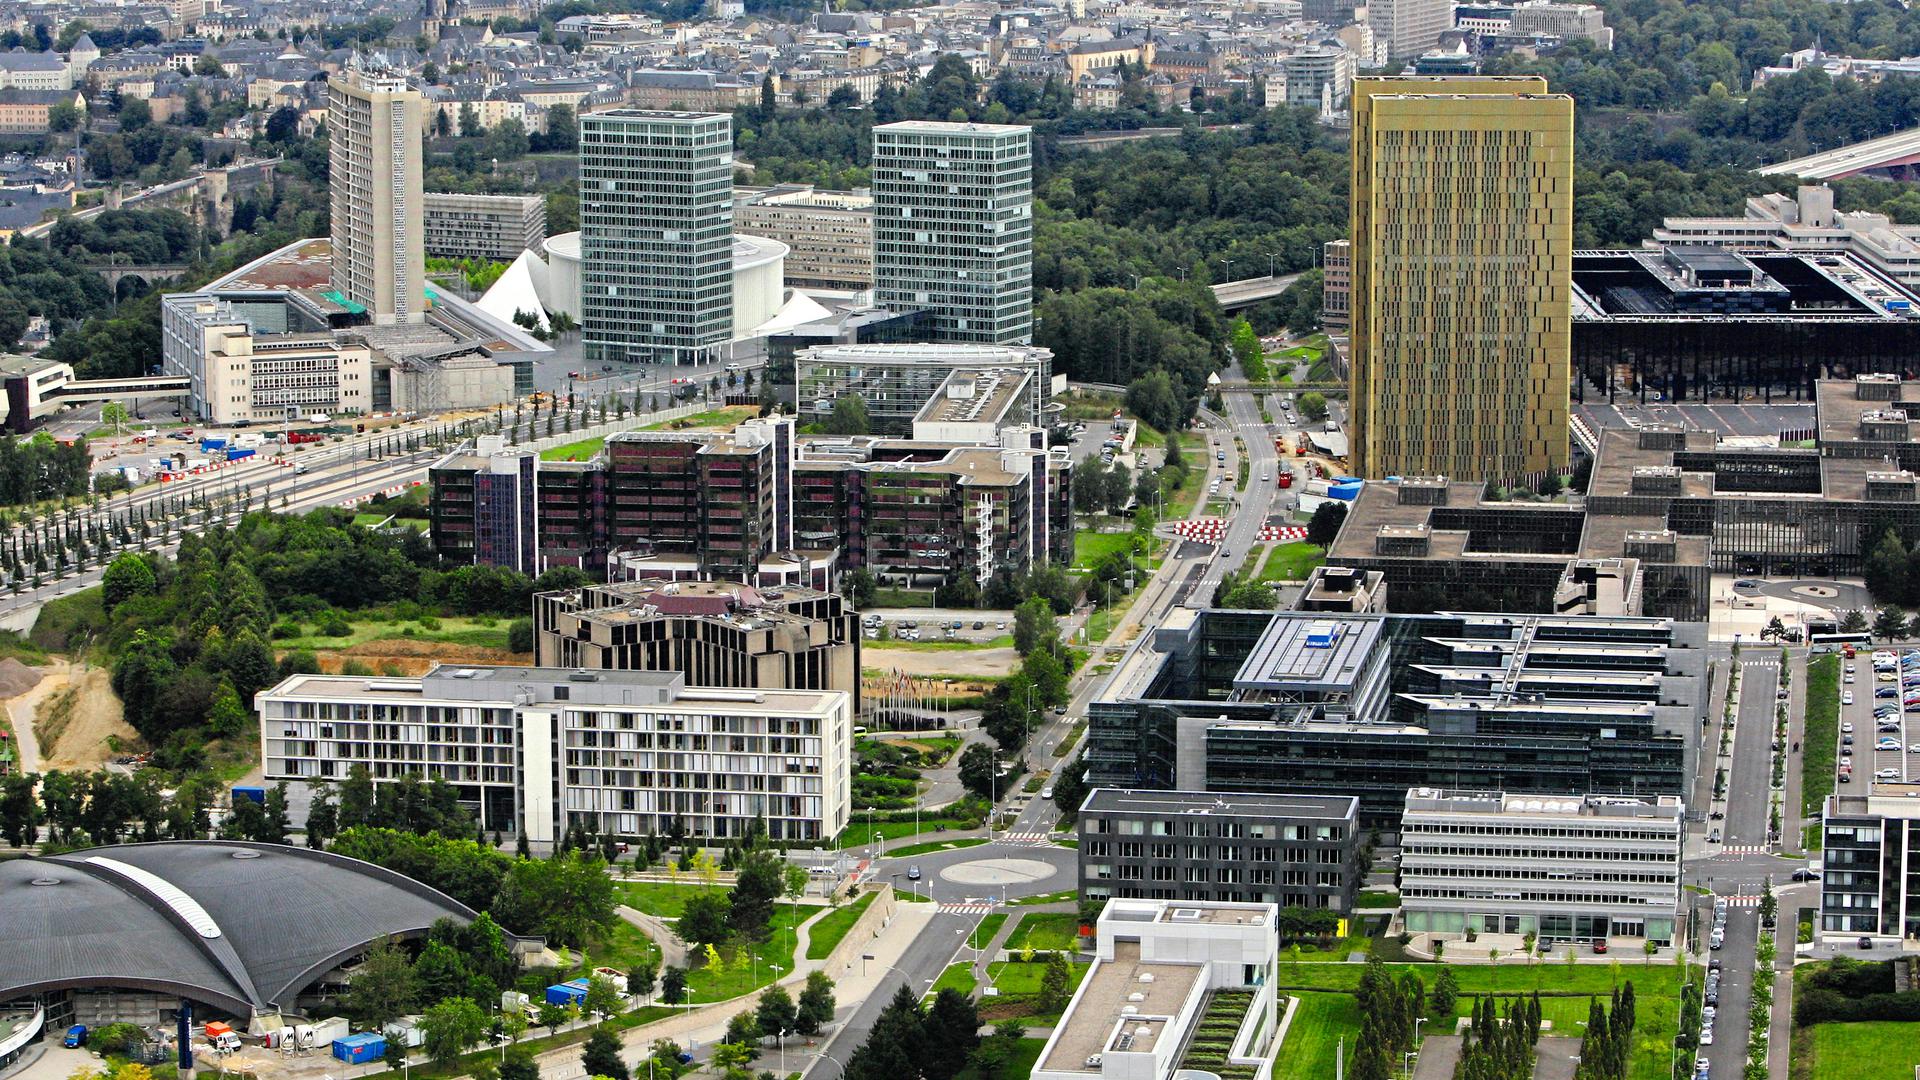 The Kirchberg area is home to EU institutions in Luxembourg